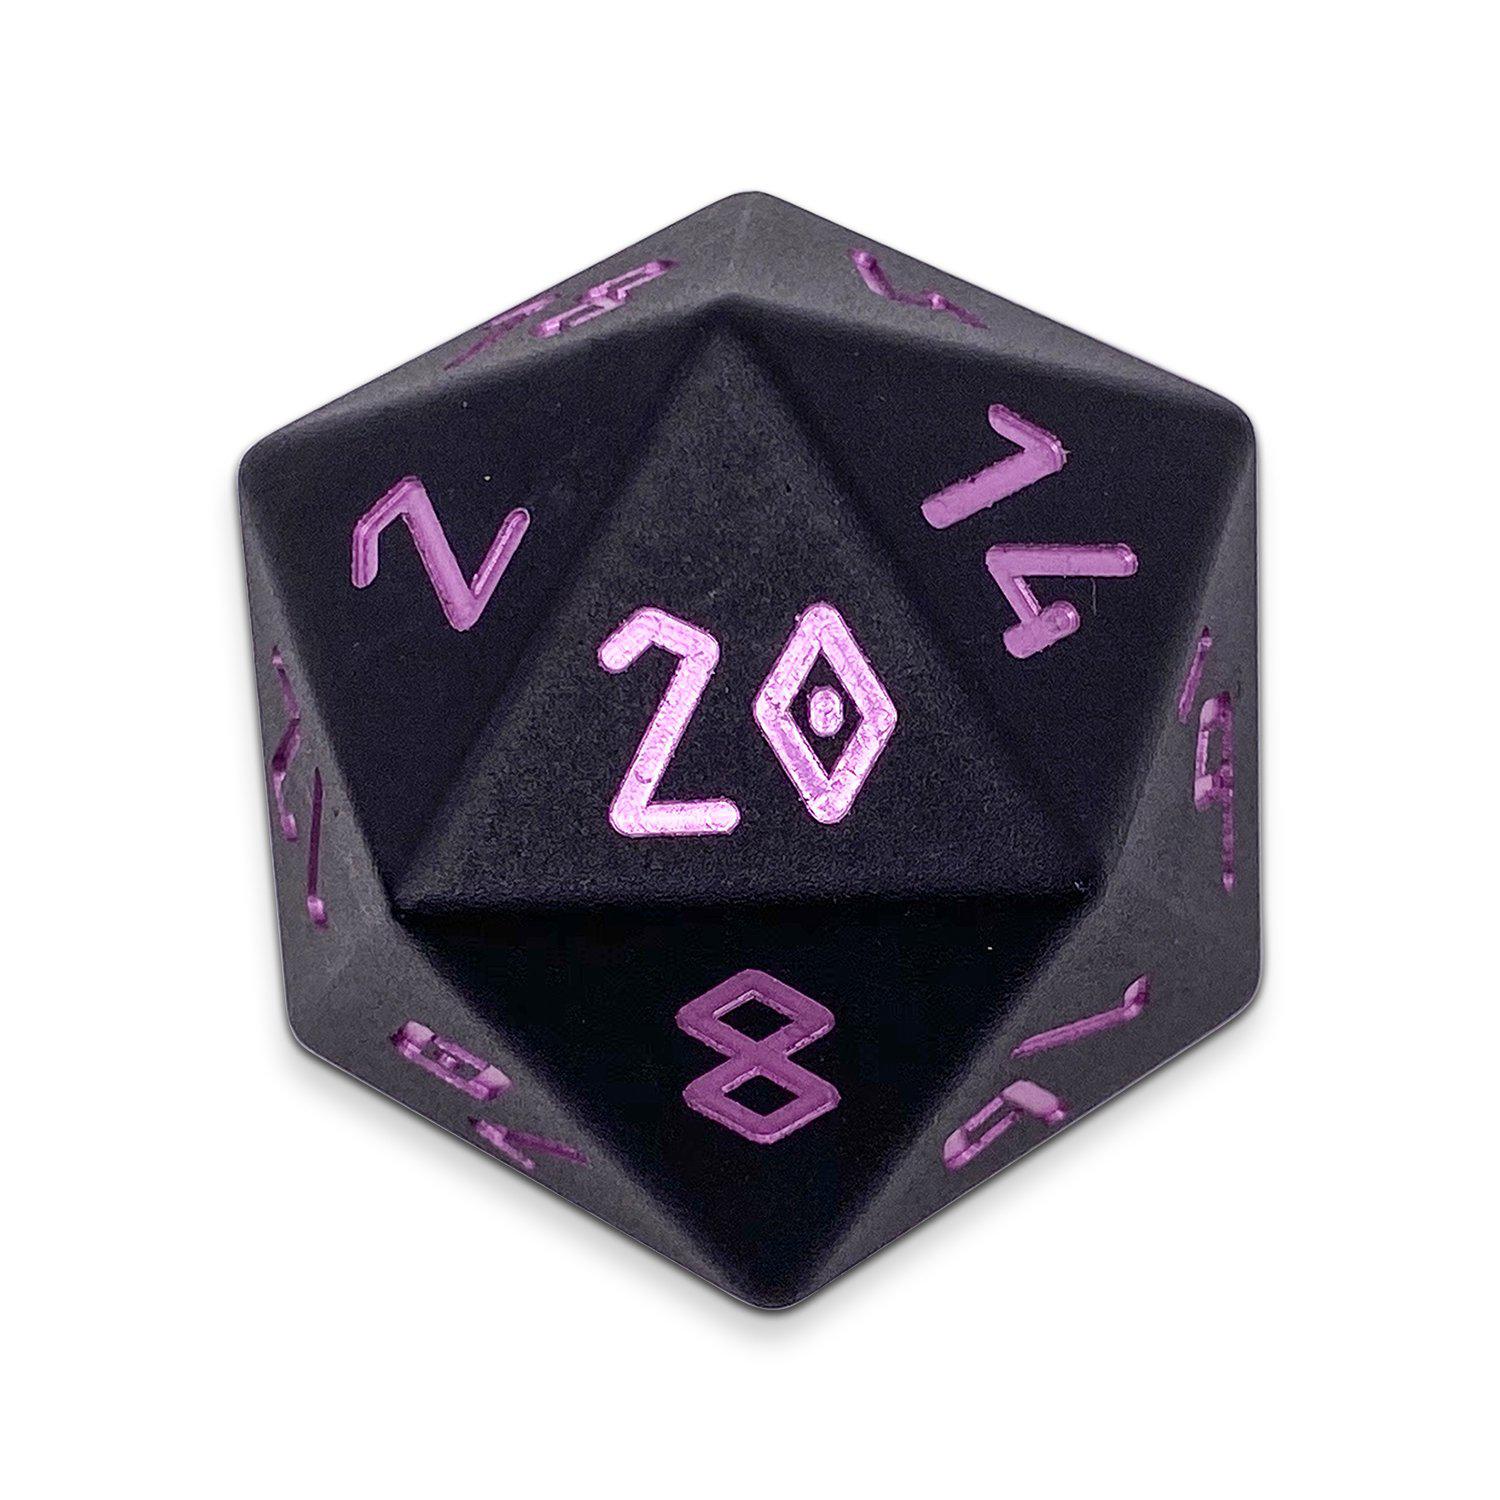 Orb of Paralysis - Boulder® 55mm 6063 Aluminum Orb Series™ Dice - NOR 02324